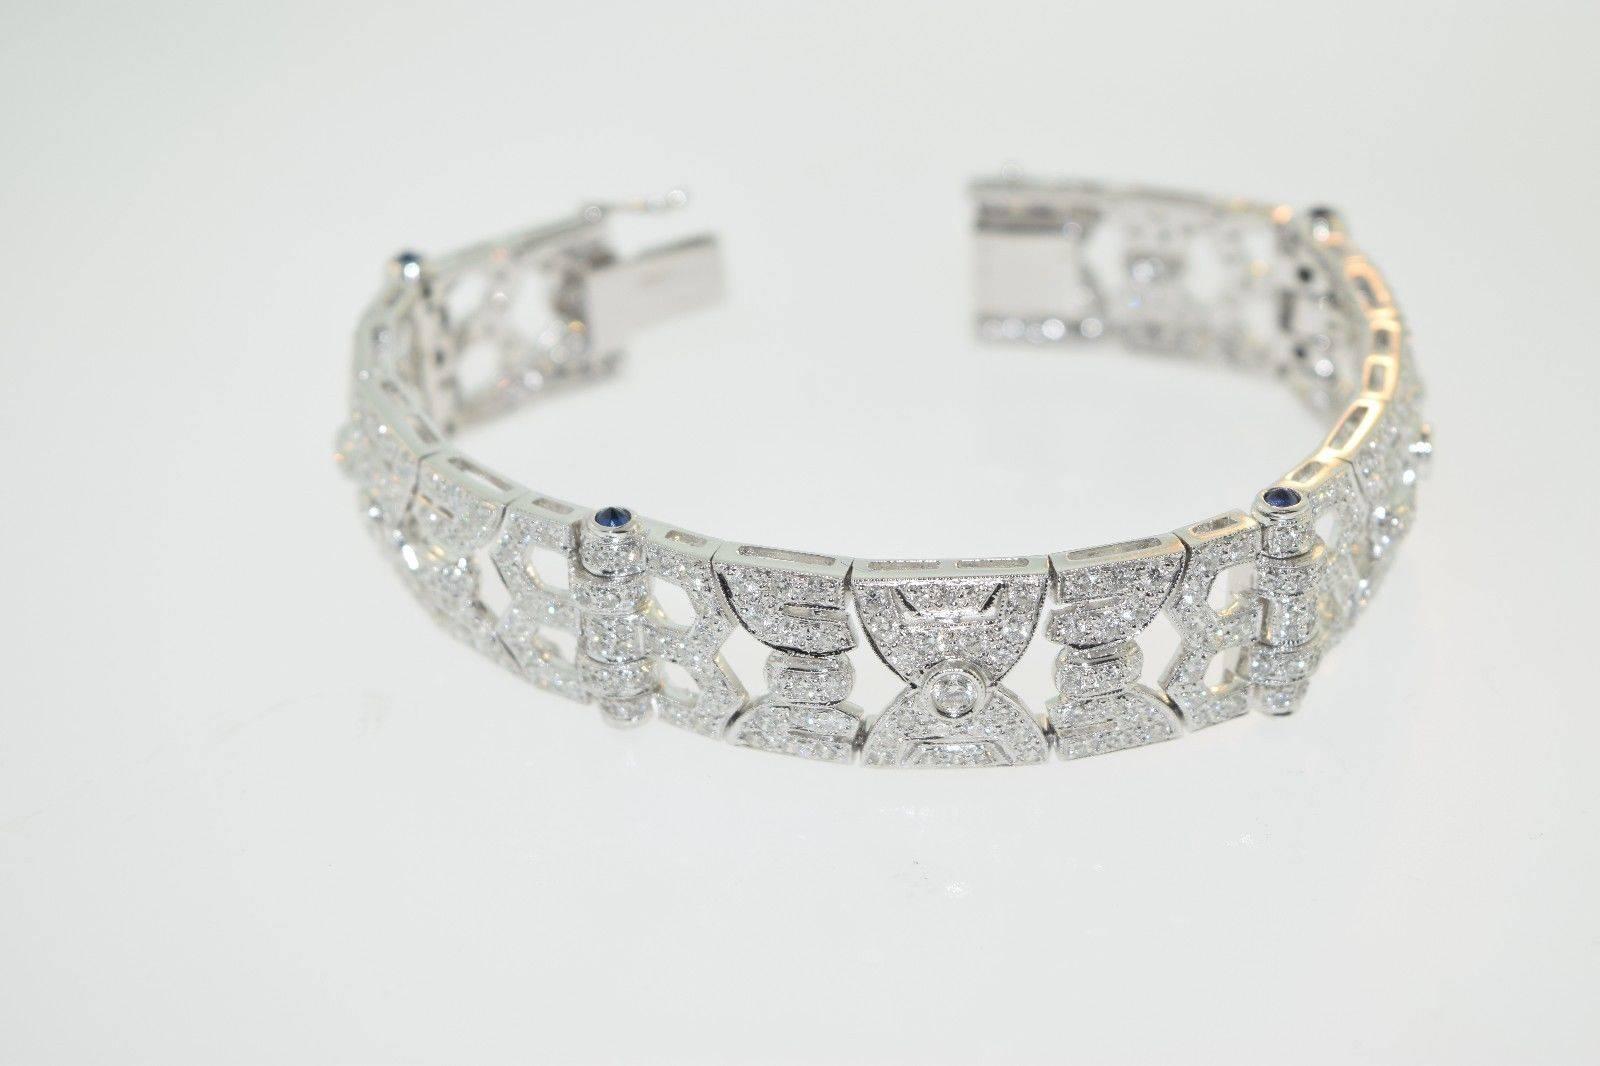 Art Deco Diamond Studded Bracelet w Sapphires 

Stunning Art Deco Diamond and Sapphire Studded Bracelet handcrafted to Perfection. 18k White Gold promises a Lasting Shine. Make a standout addition to your collection with this Bracelet.

Metal: